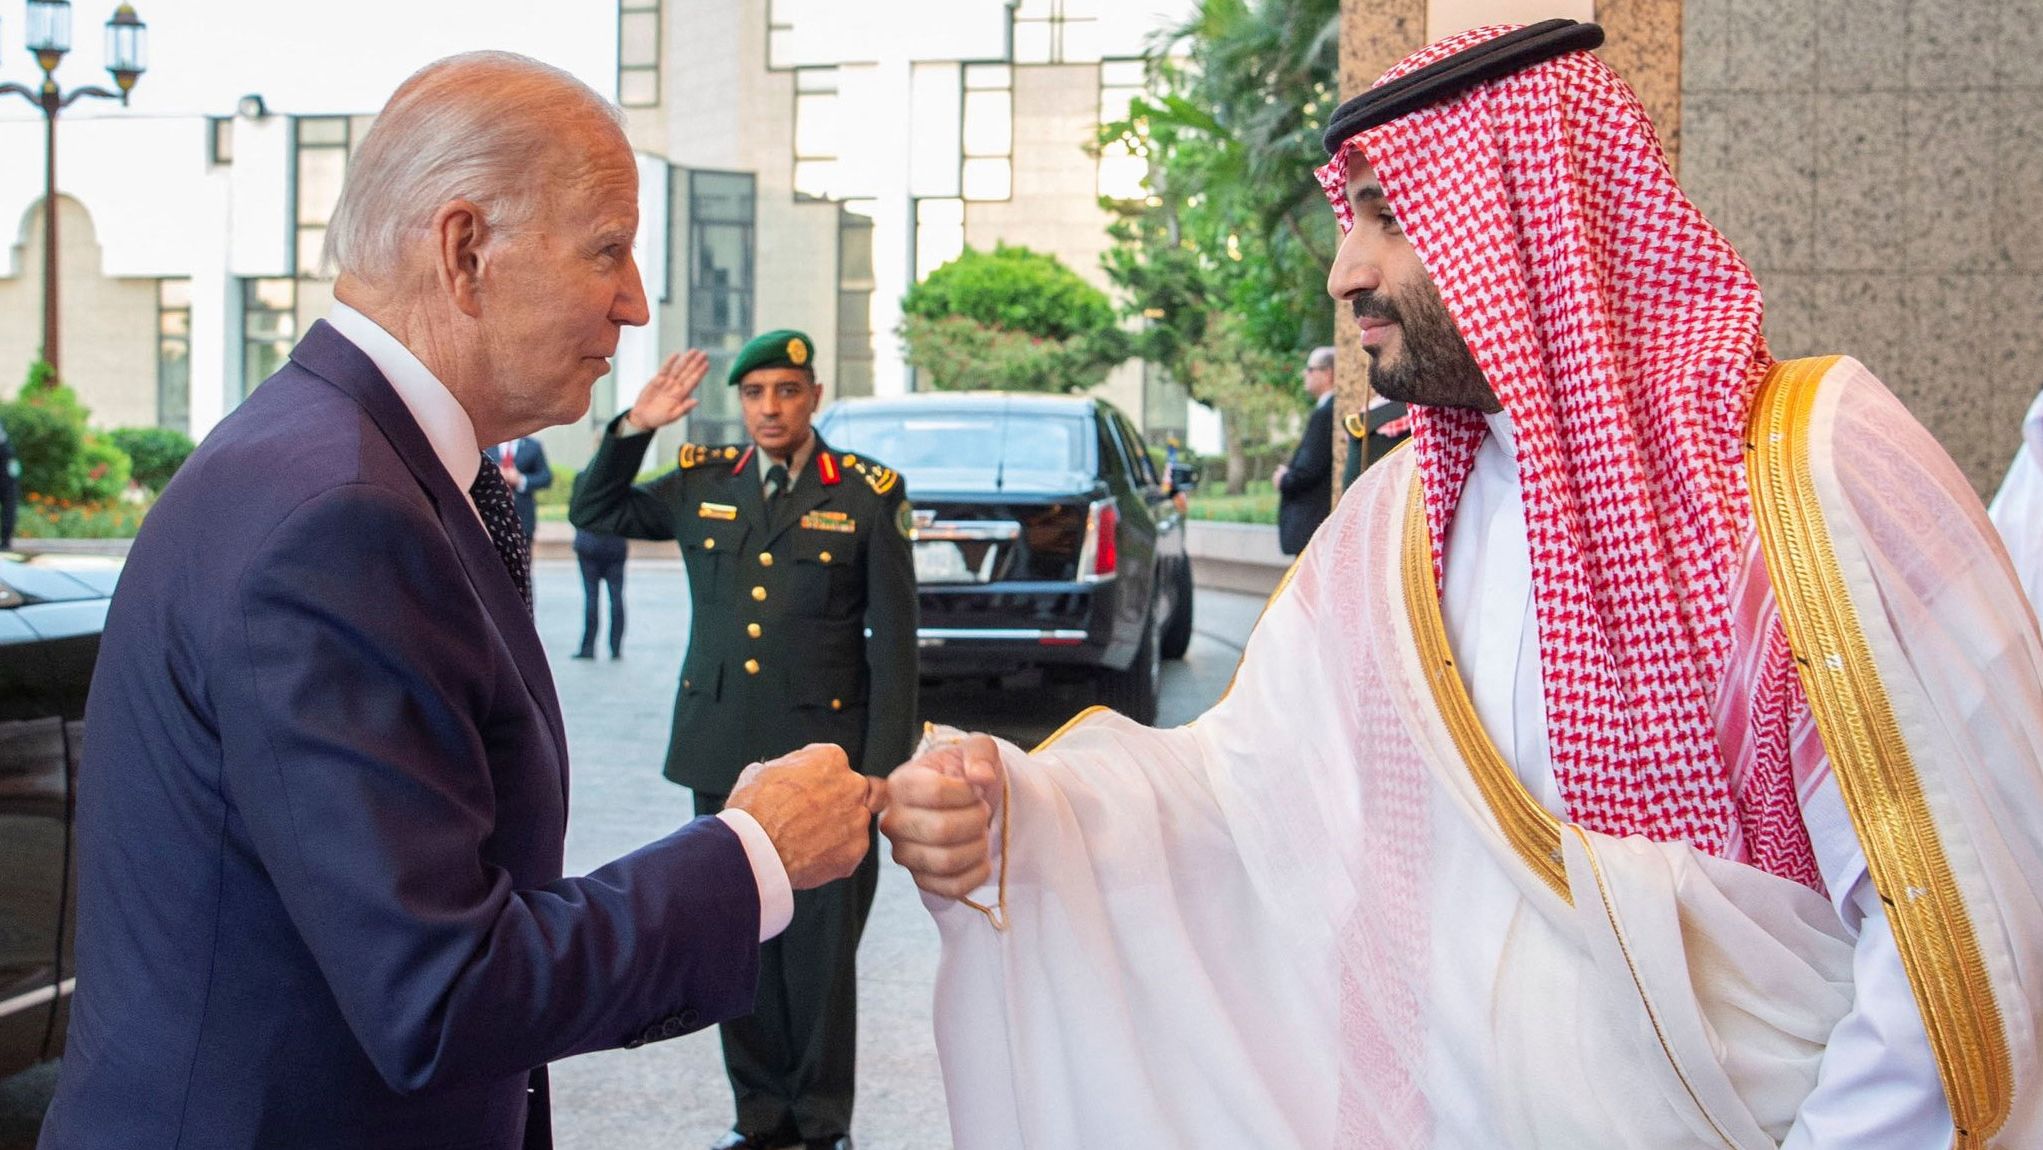 Biden and the Saudi Crown Prince exchange a fist bump Friday, July 15, as Biden arrives at the Al Salam Royal Palace in Jeddah, Saudi Arabia.